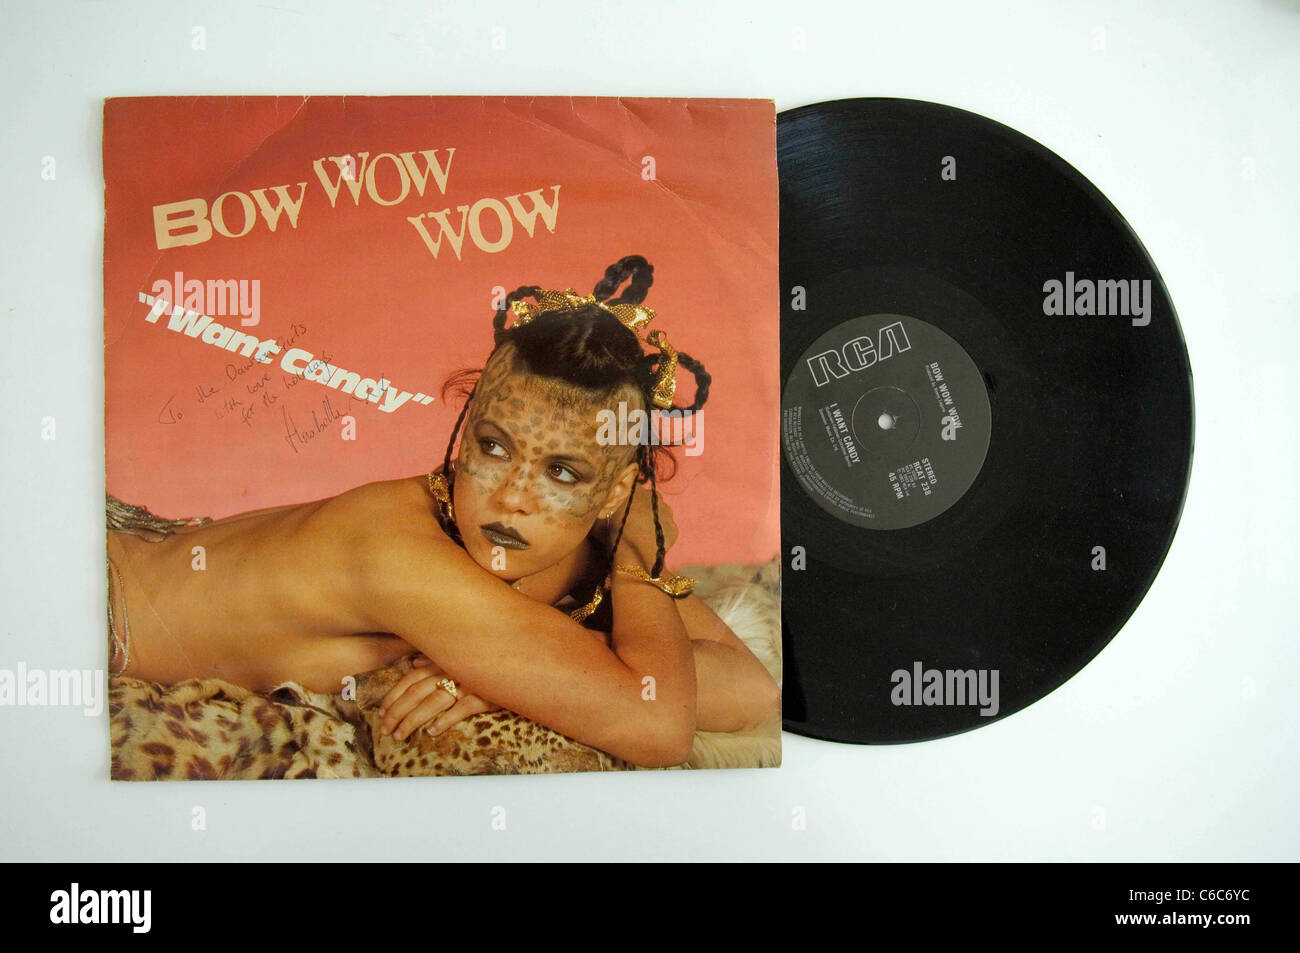 Bow Wow Wow 'I want candy' 12 inch single with Annabella Lwin on the cover. Signed by Annabella. Stock Photo